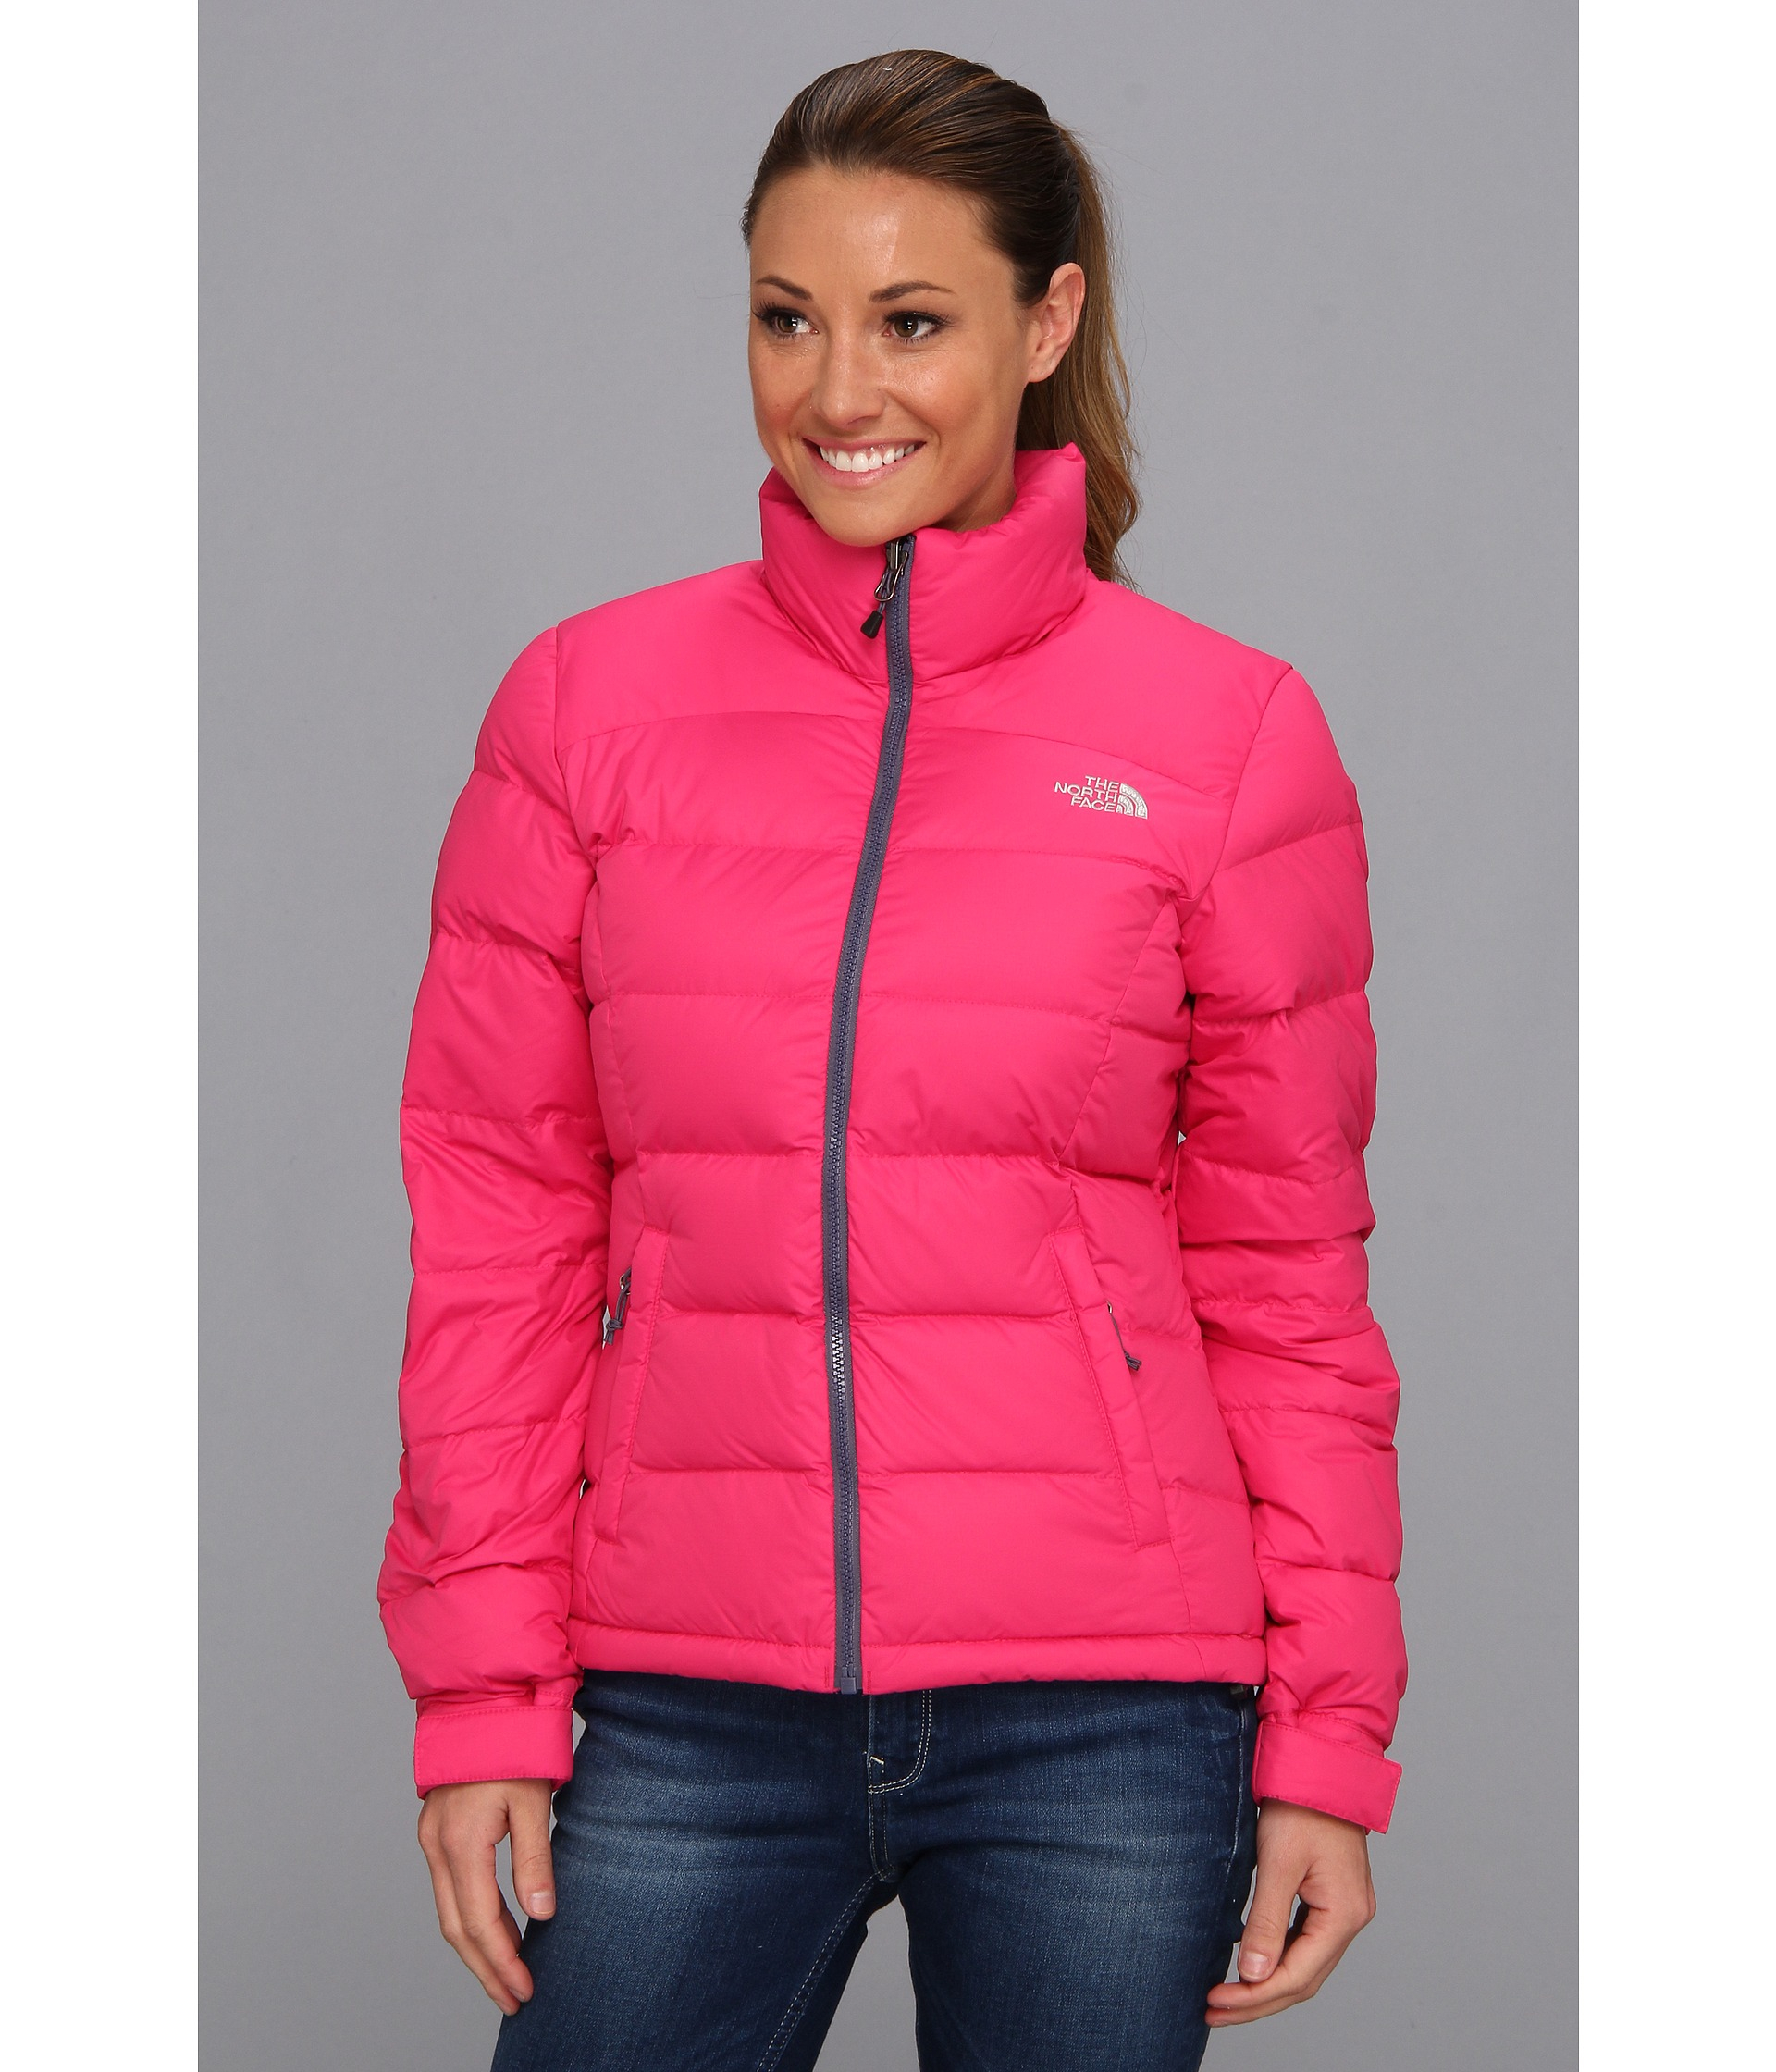 The North Face Women S Nuptse 2 Jacket Cheaper Than Retail Price Buy Clothing Accessories And Lifestyle Products For Women Men